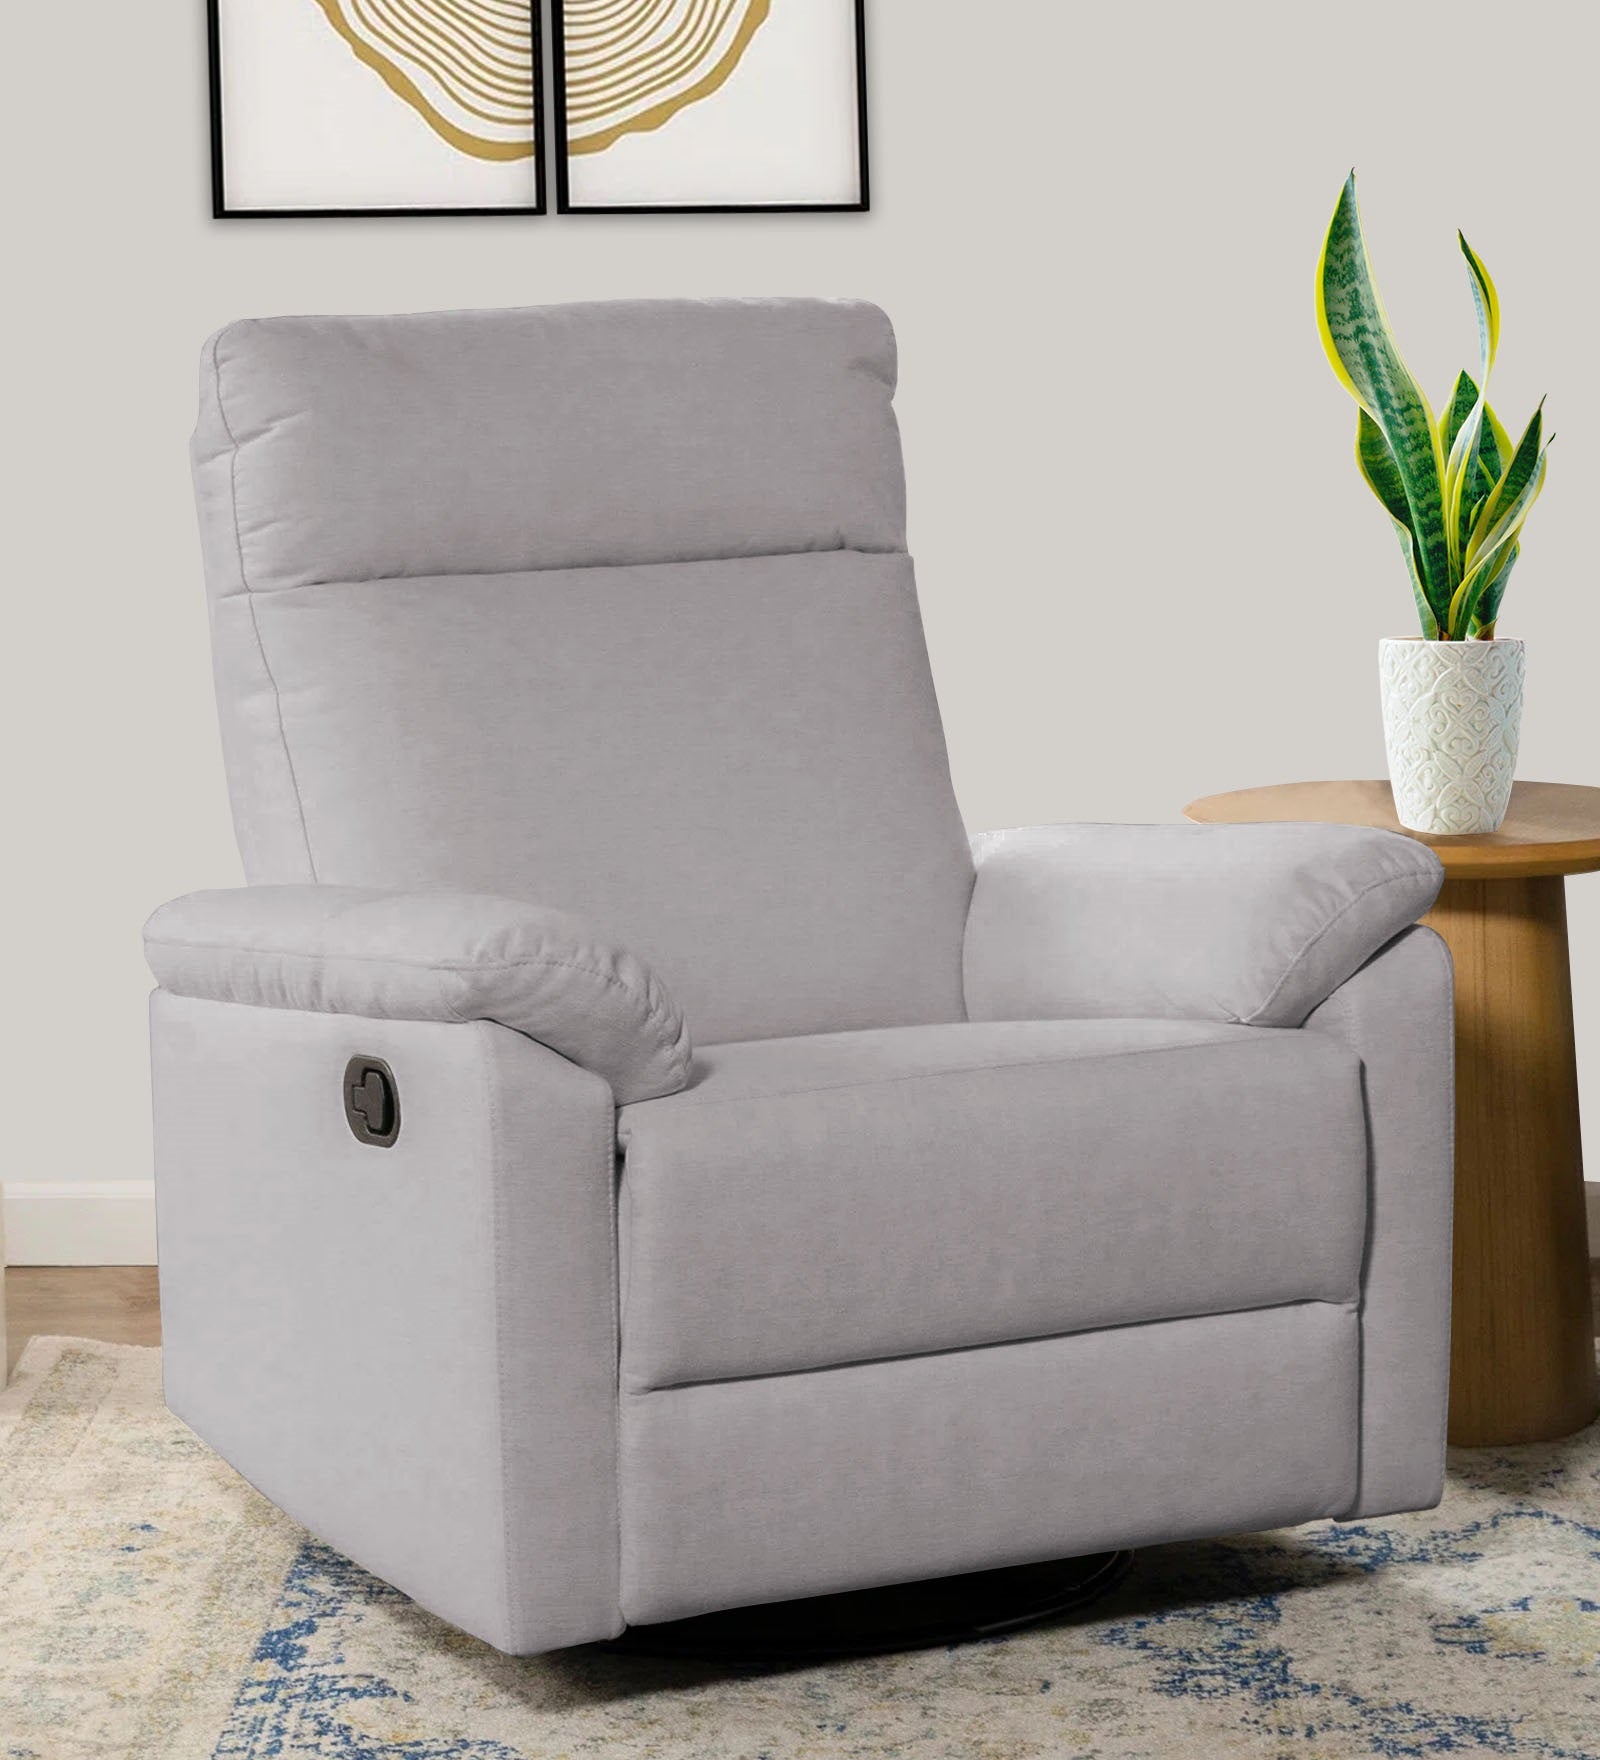 Mandy Fabric Manual 1 Seater Recliner In Concrete Grey Colour